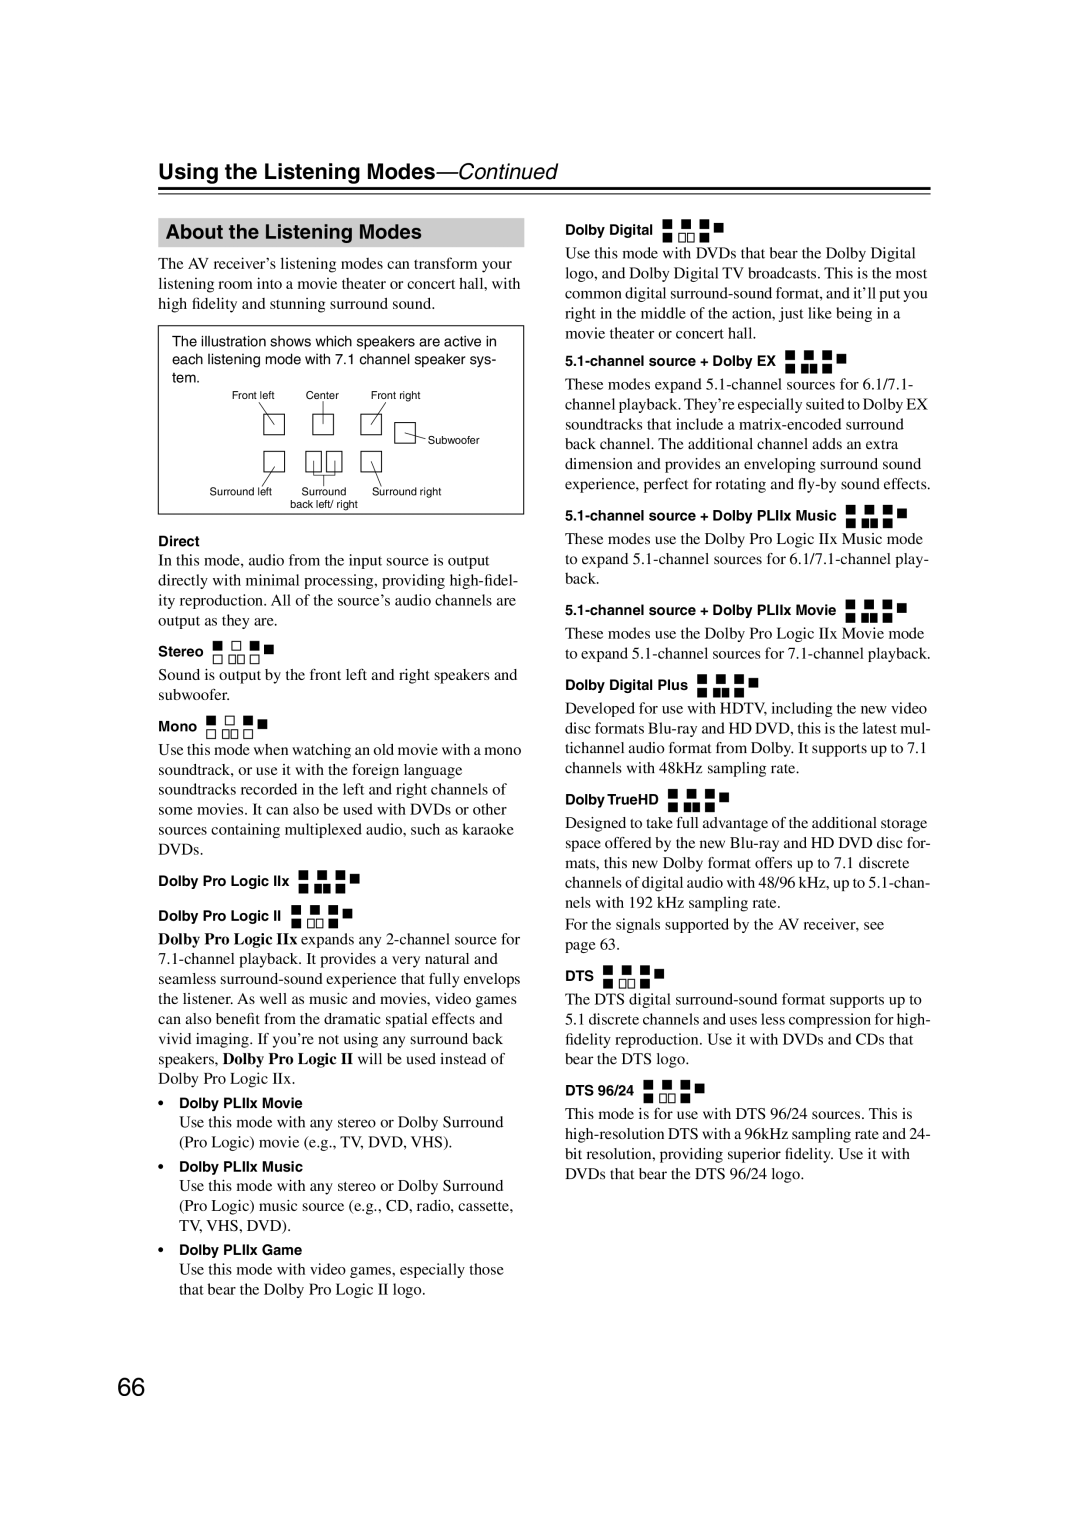 Onkyo HT-S6100 instruction manual About the Listening Modes, Using the Listening Modes-Continued 